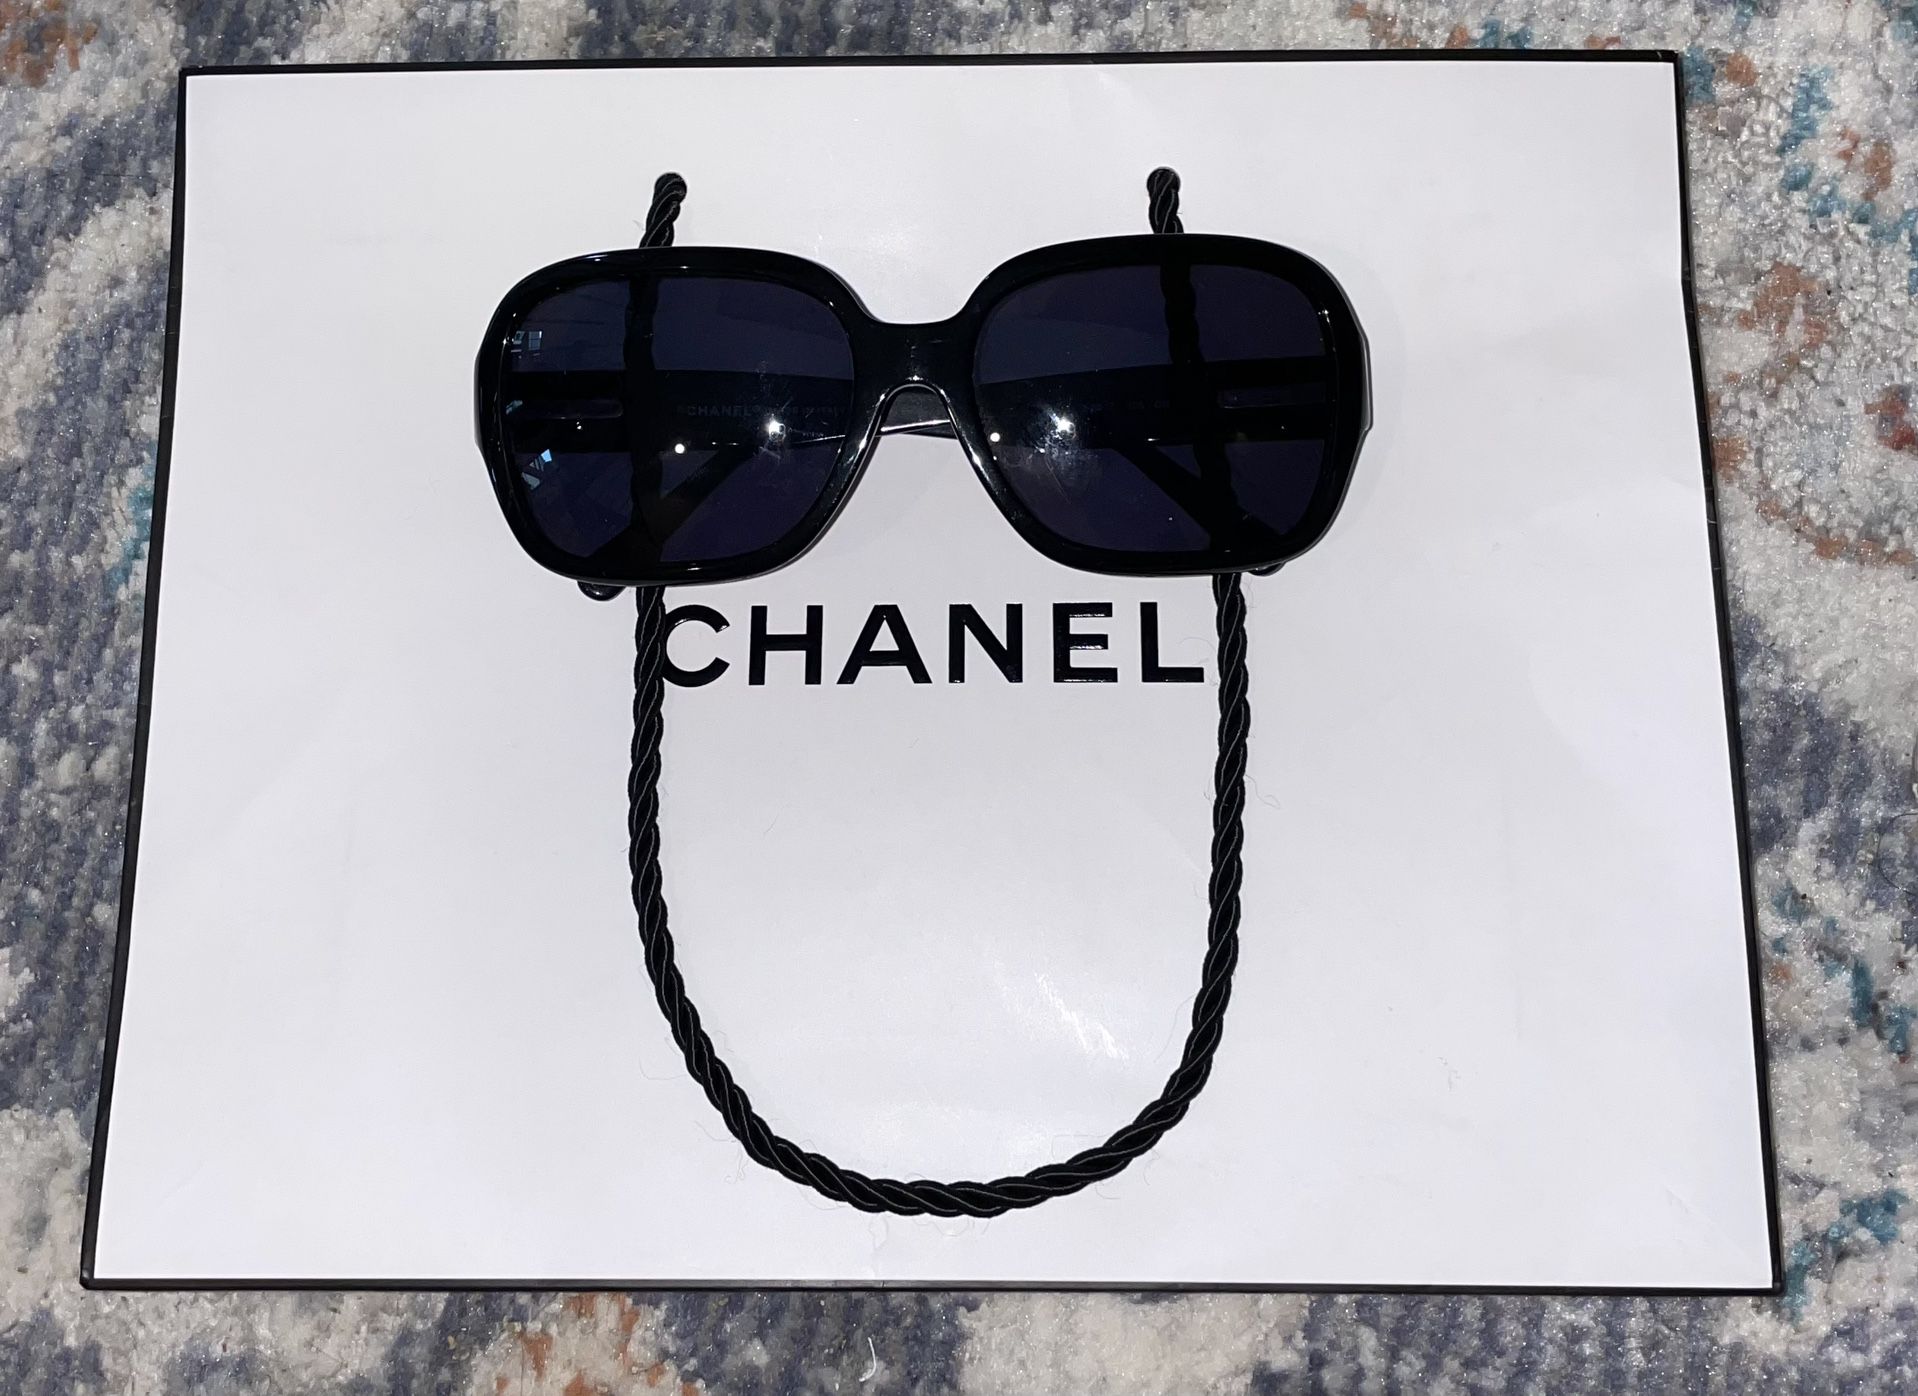 2000s Chanel Sunglasses - 2 For Sale on 1stDibs